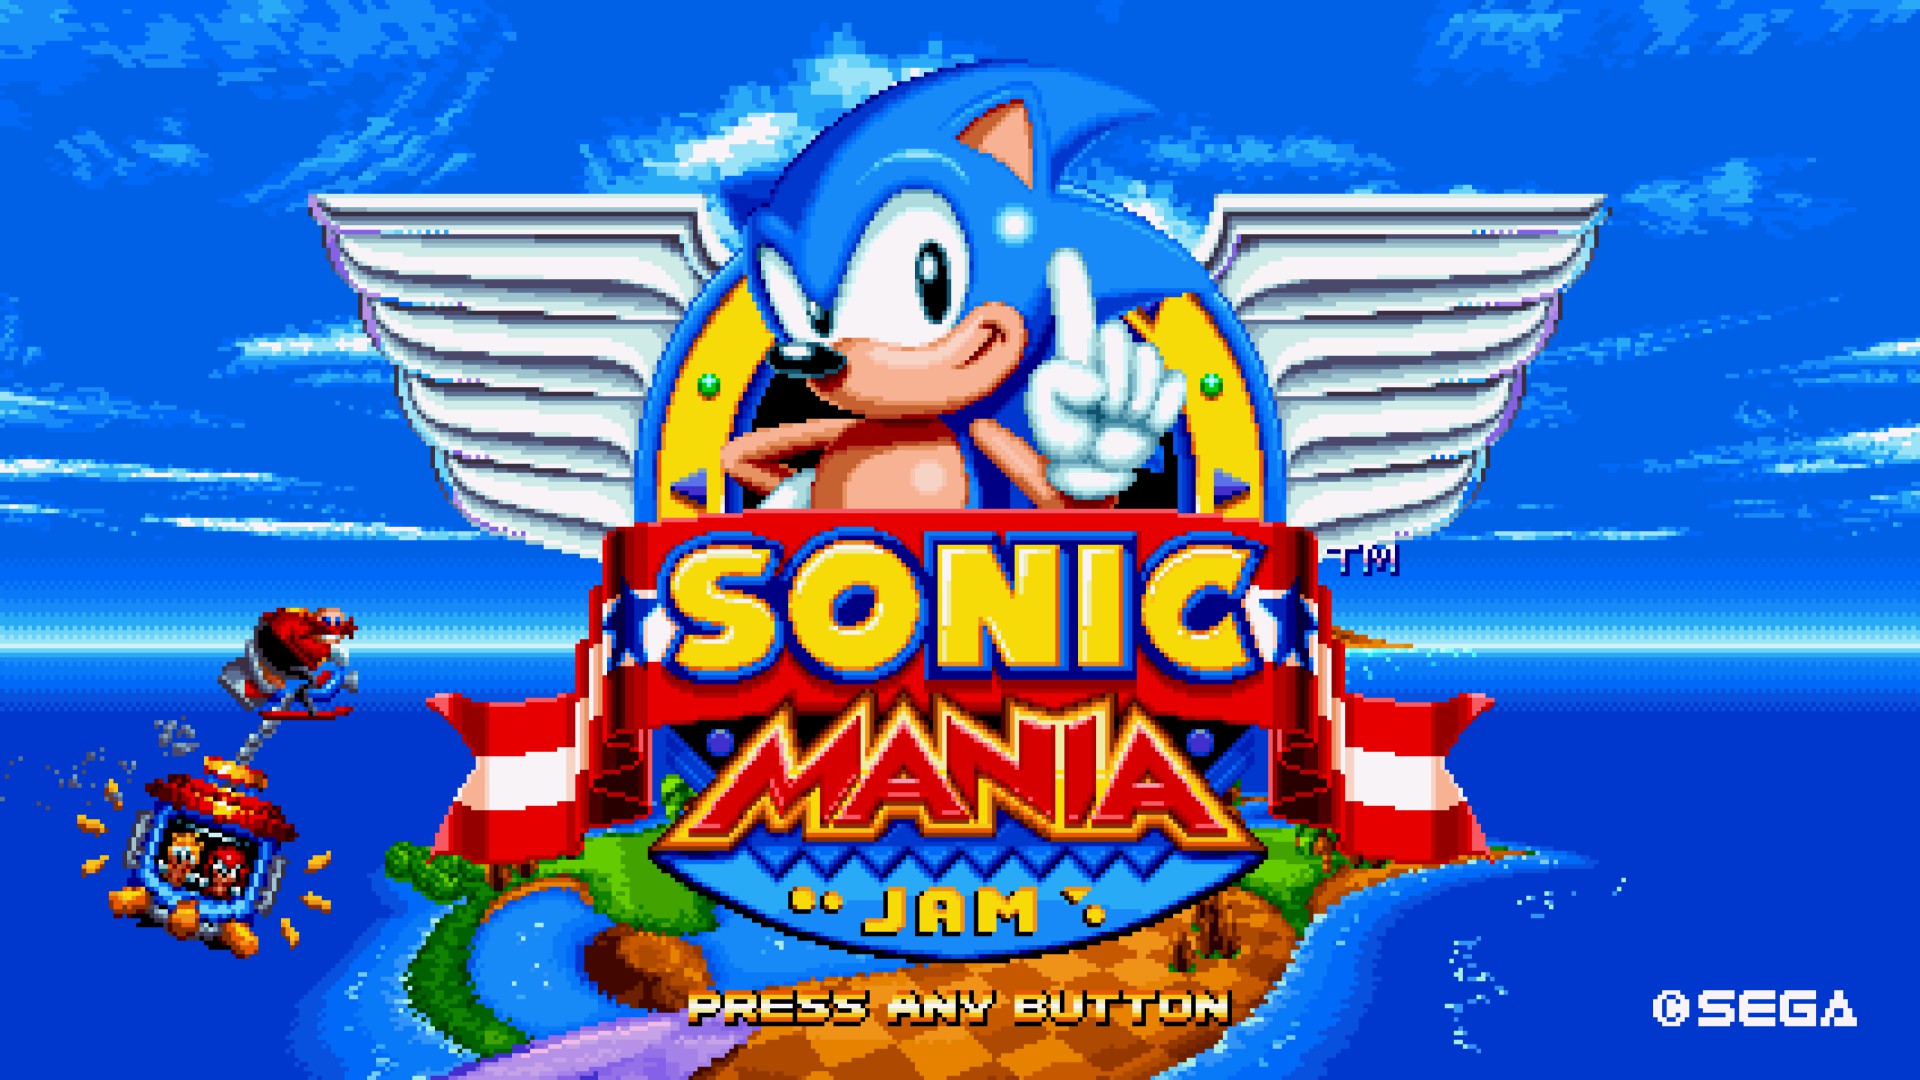 Sonic Hacking Contest :: The SHC2023 Contest :: Sonic Mania Addendum :: By  KiaraGale